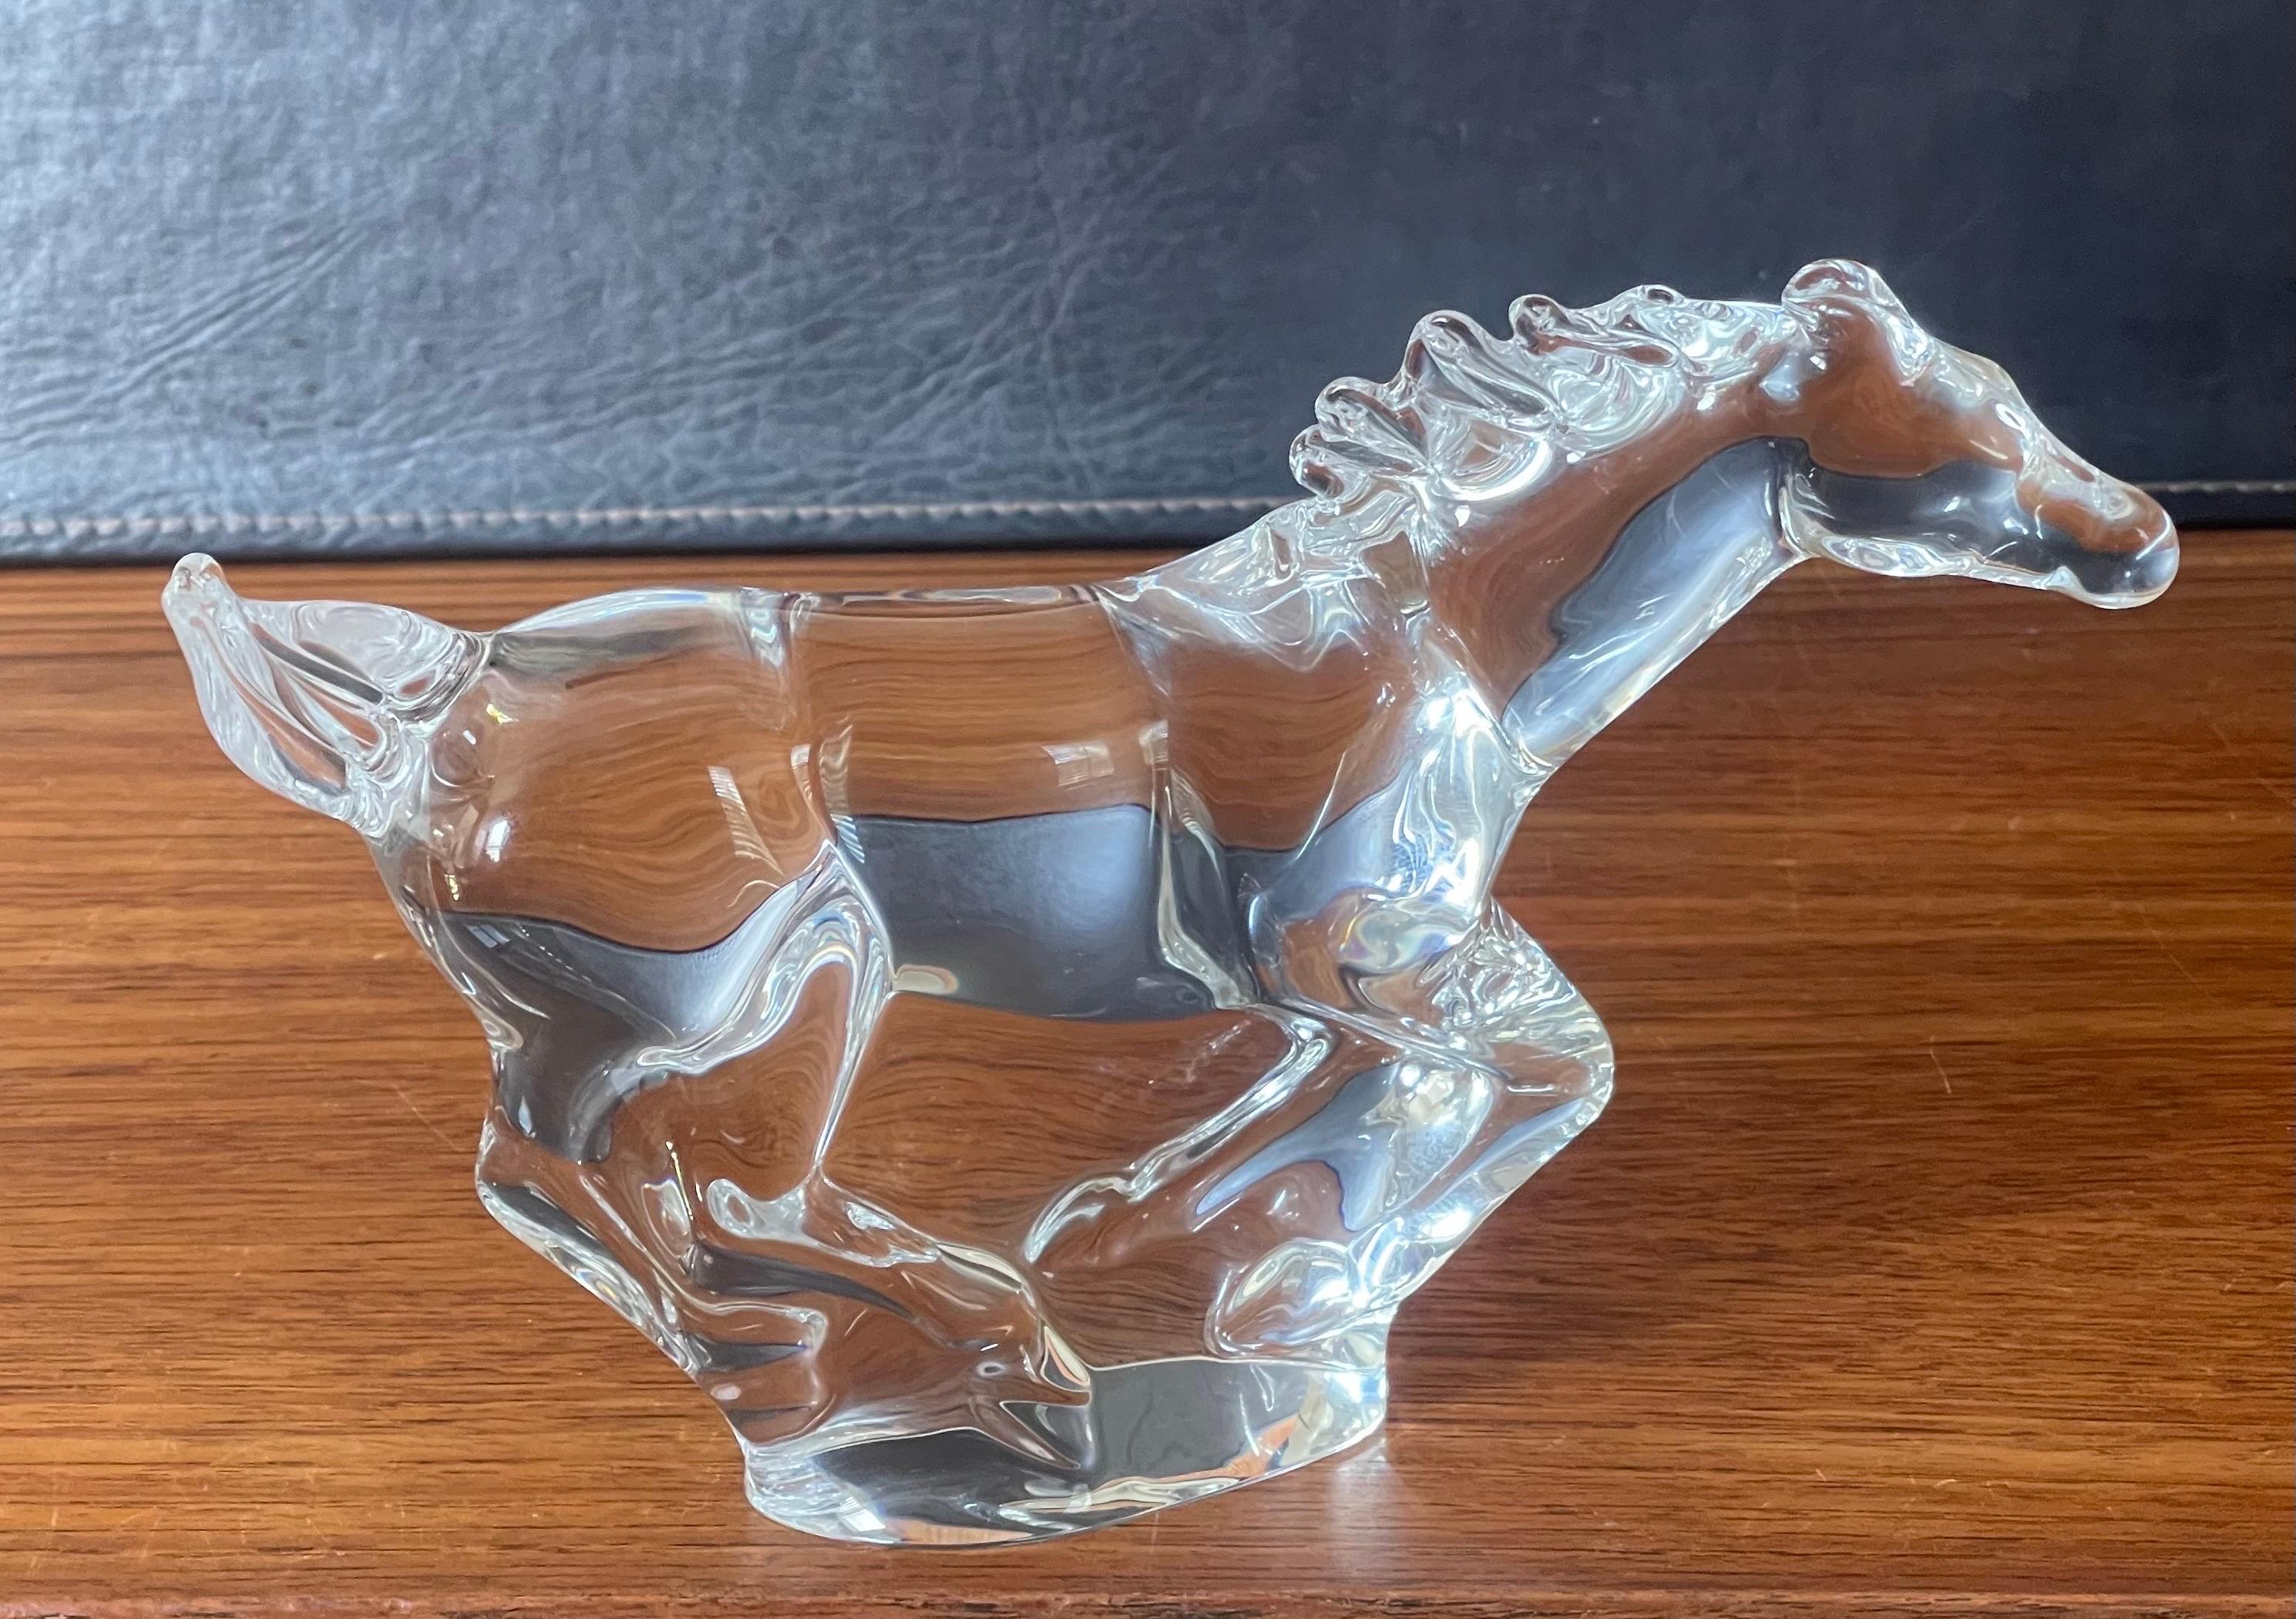 Crystal Galloping Horse / Mustang Sculpture by Steuben Glassworks In Good Condition For Sale In San Diego, CA